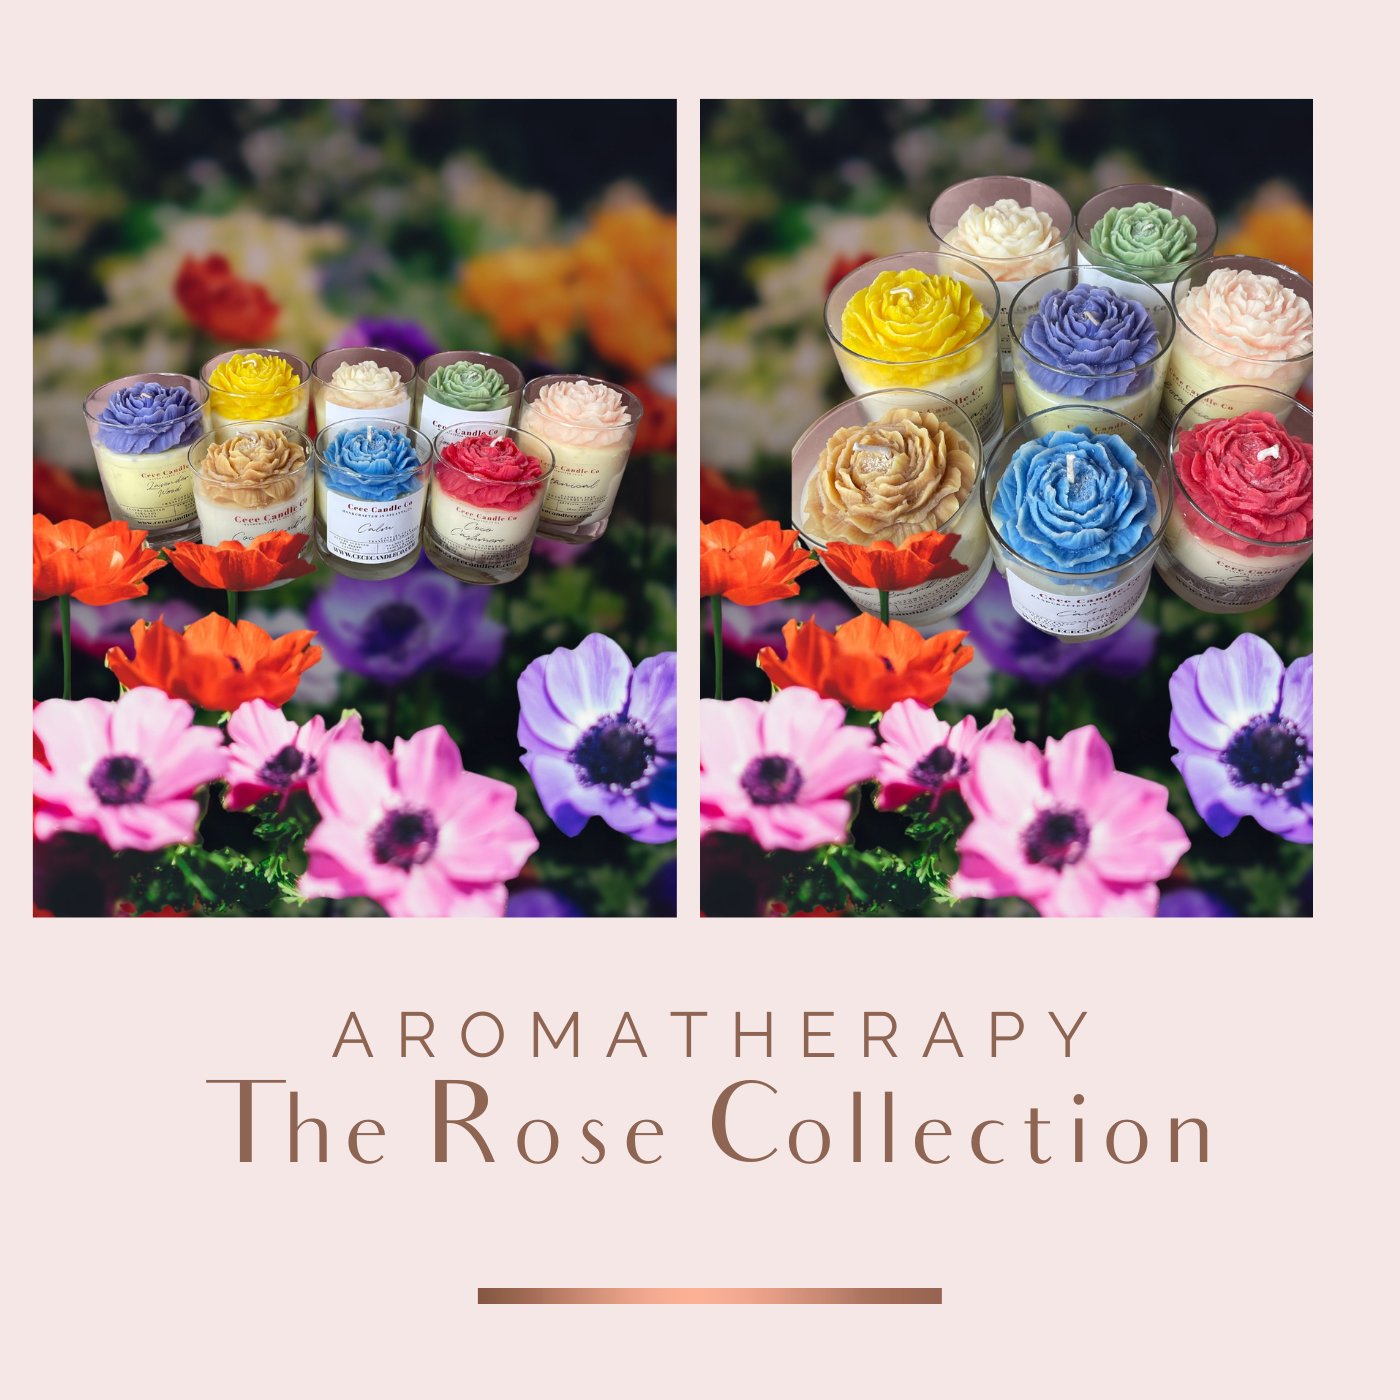 The Rose Collection